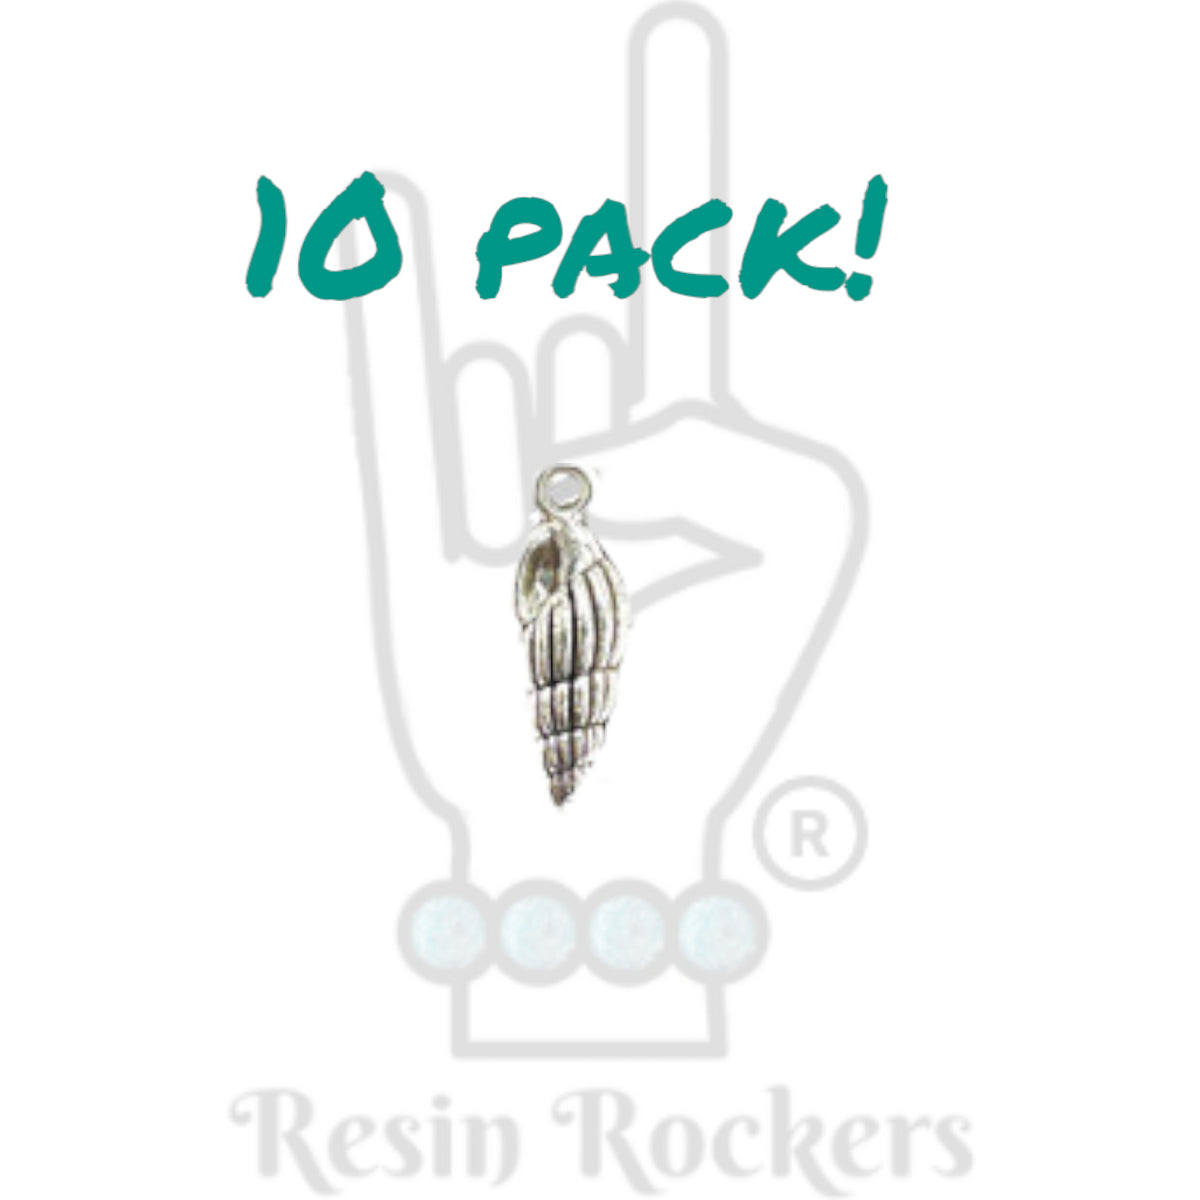 Silver Plated Stainless Steel Mini Conch Sea Shell Charm - 10 Pack